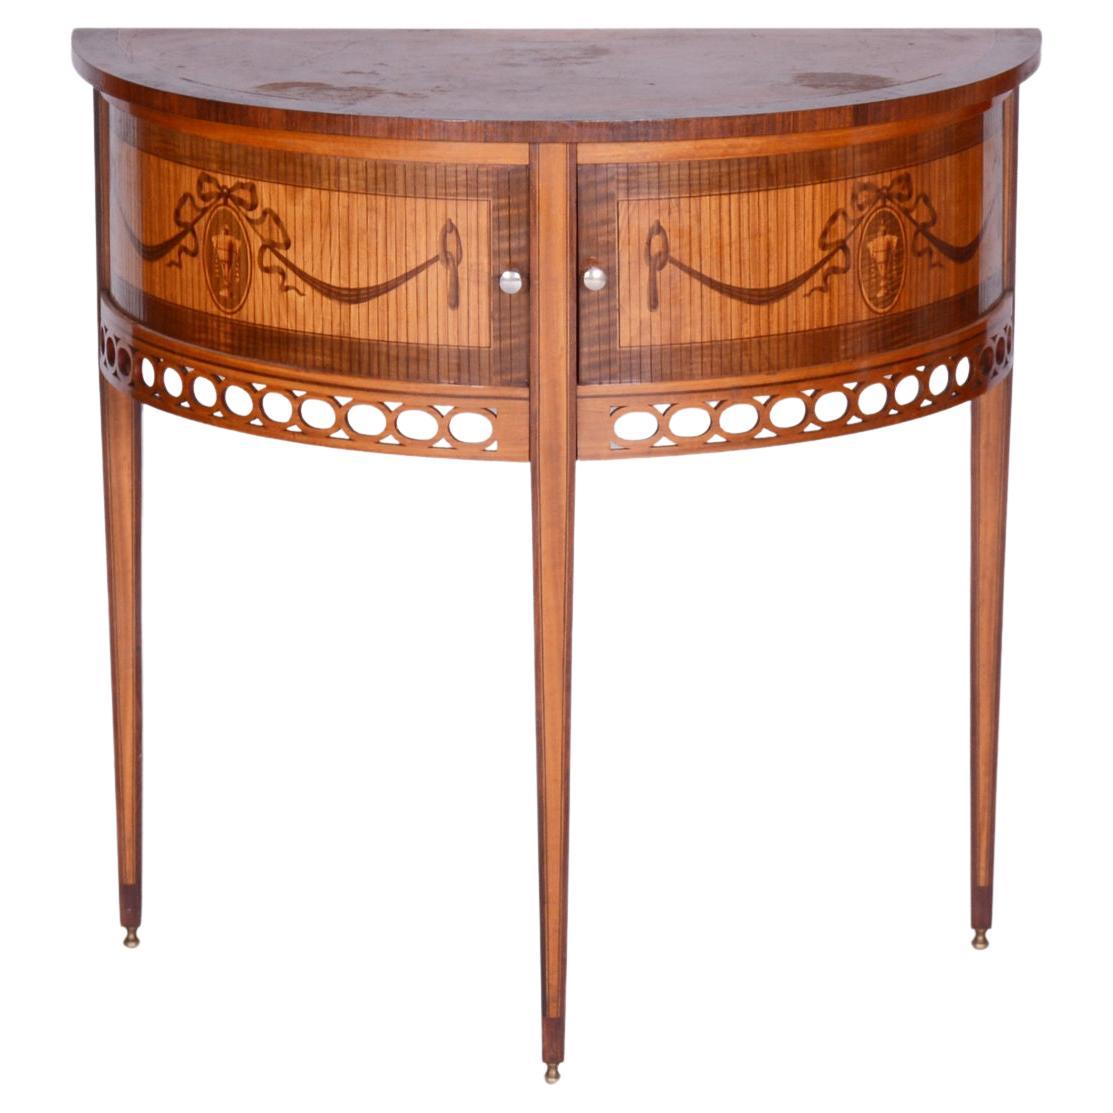 Restored Biedermeier Side Table, Walnut, Maple, Unique Marquetry, France, 1850s For Sale